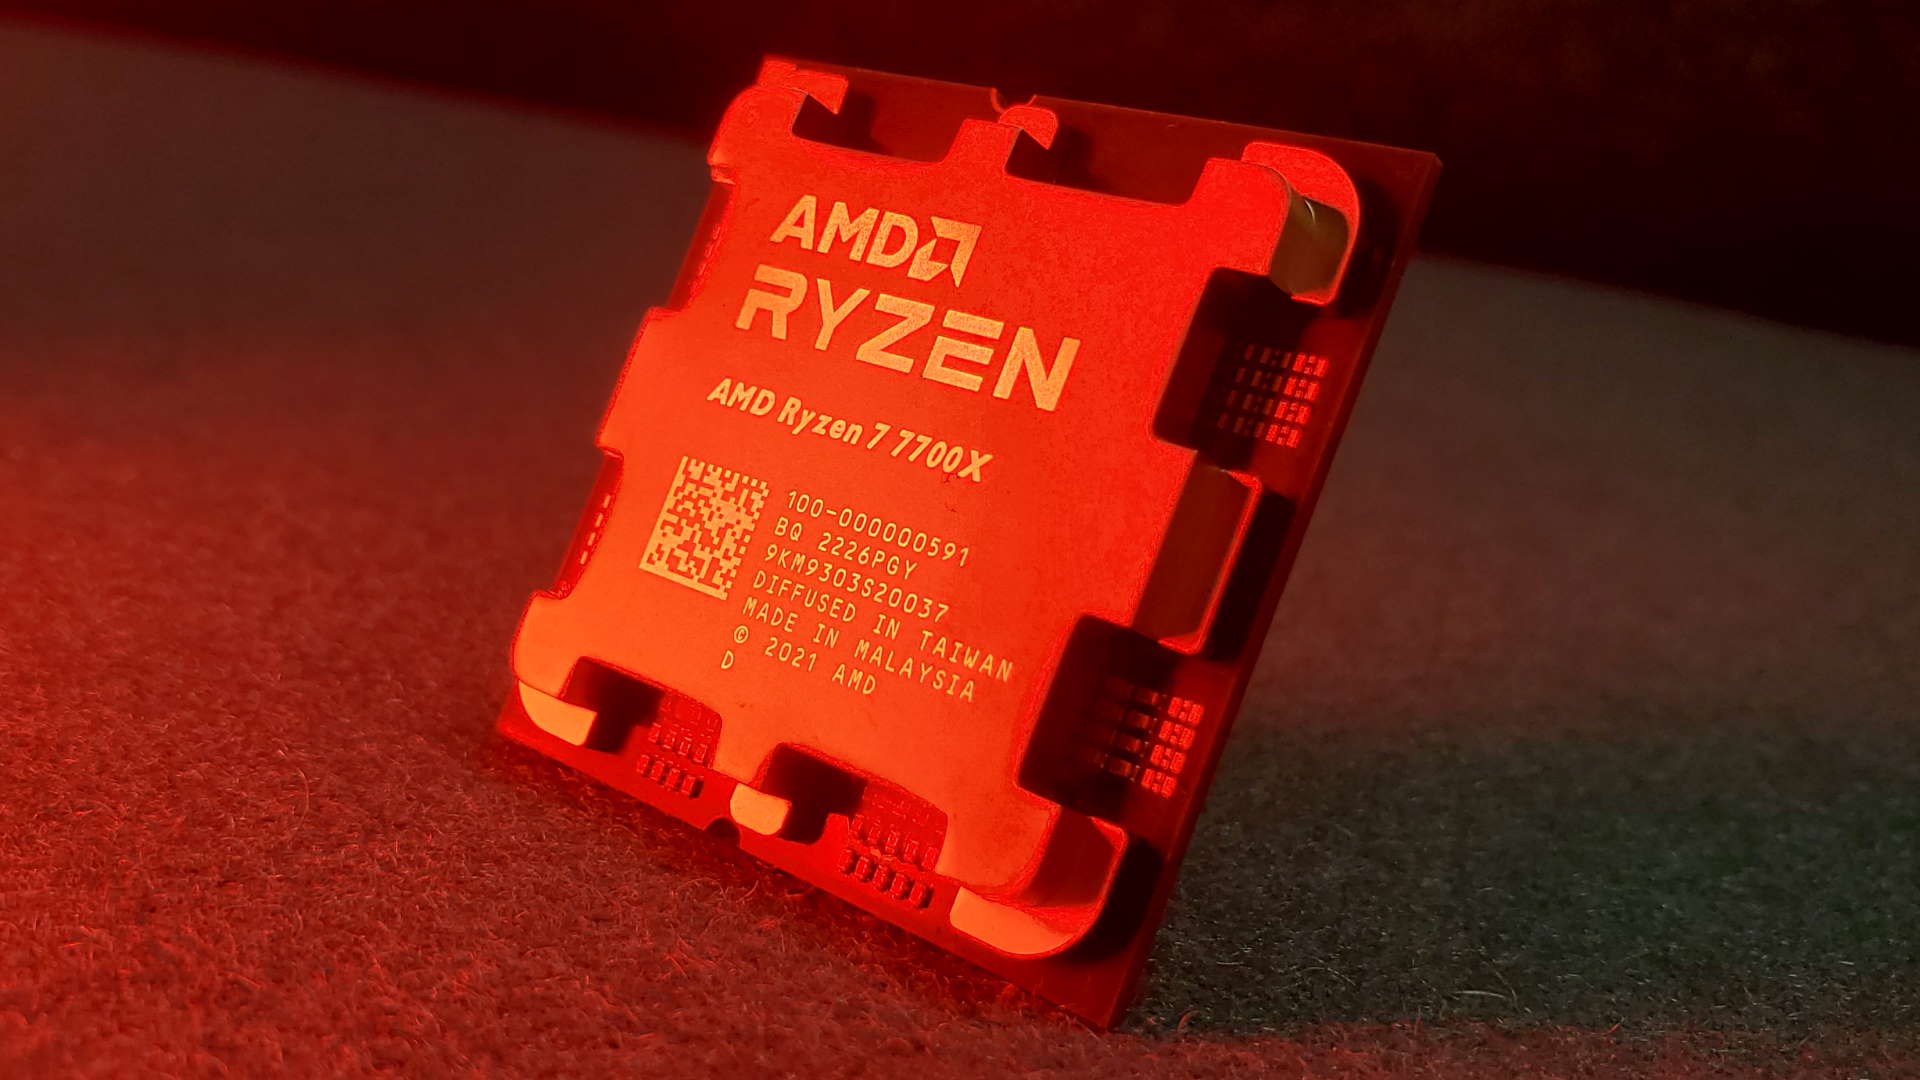 AMD’s new Ryzen 7000-series processors are now available to buy